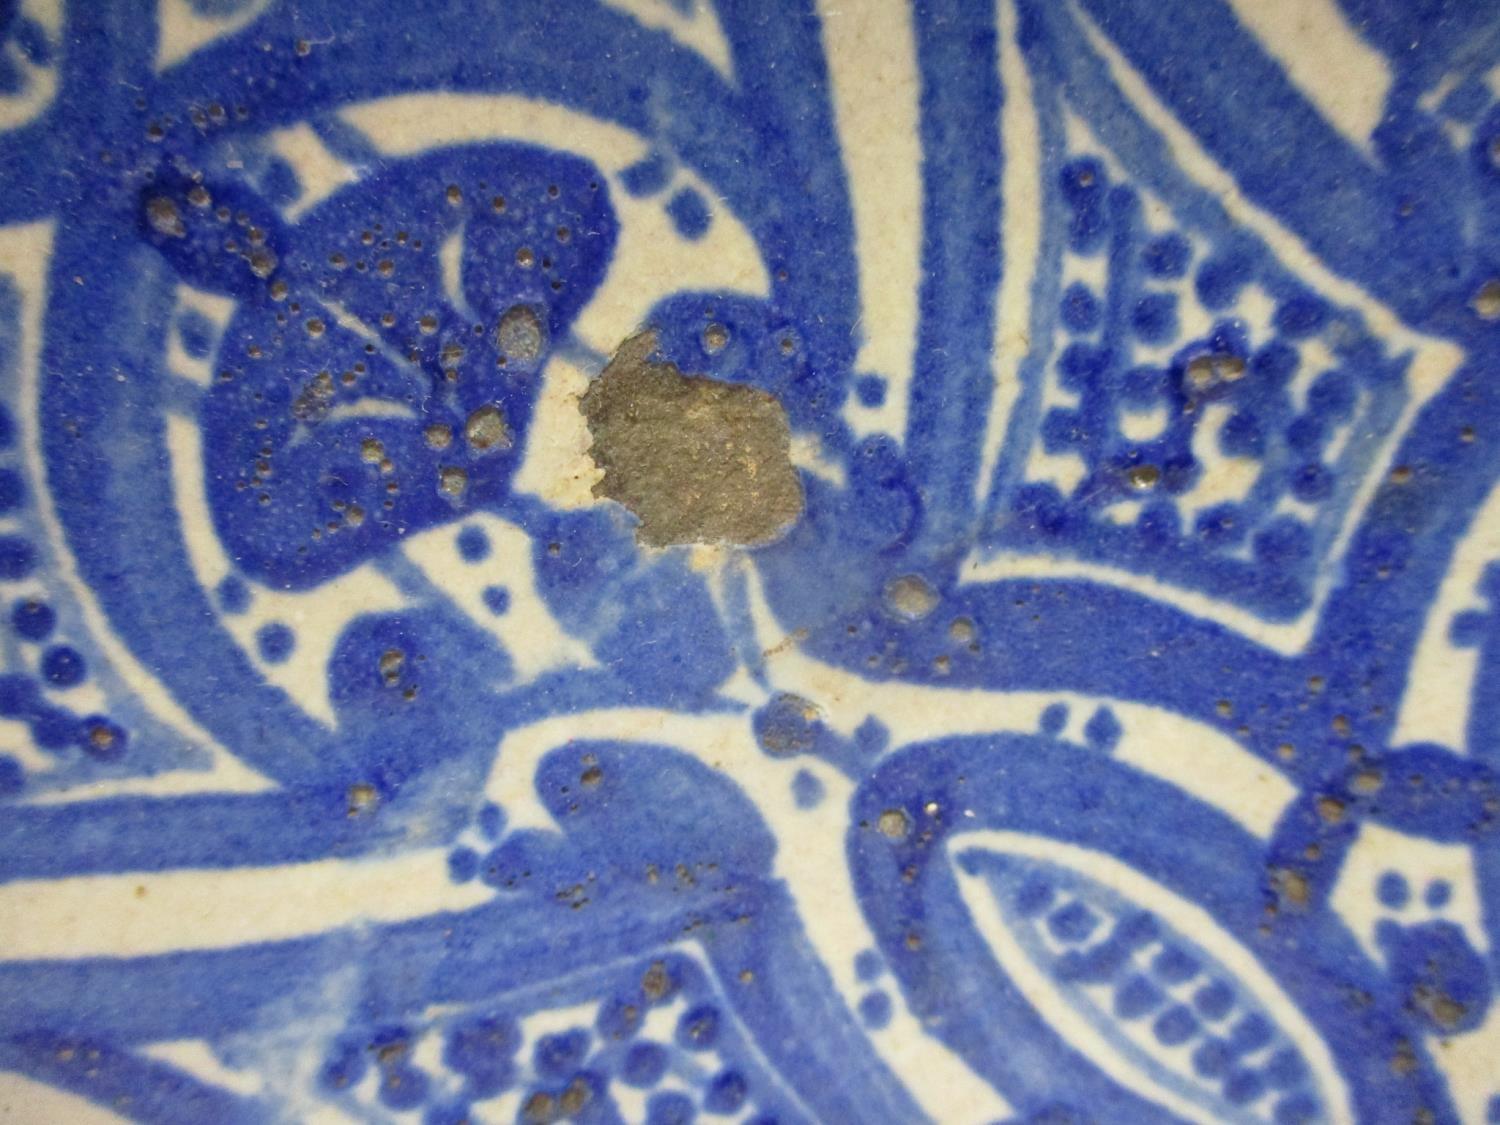 An early 20th century Islamic pottery bowl decorated with panels in blue and white, 13 1/4"dia - Image 2 of 4